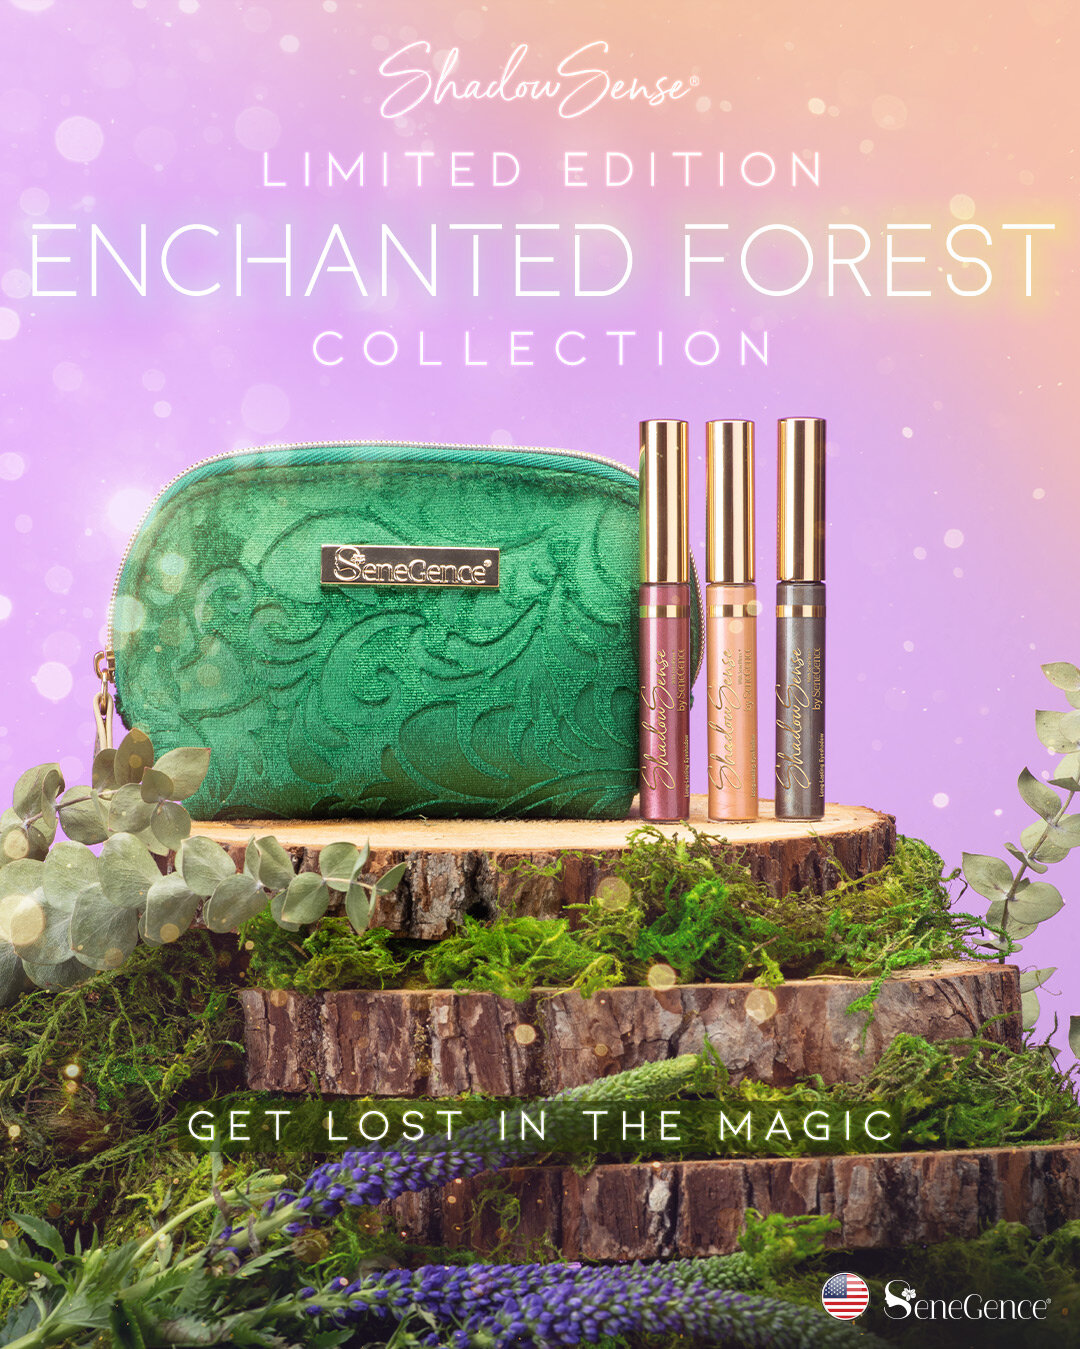 Enchanted Forest ShadowSense Collection.jpg